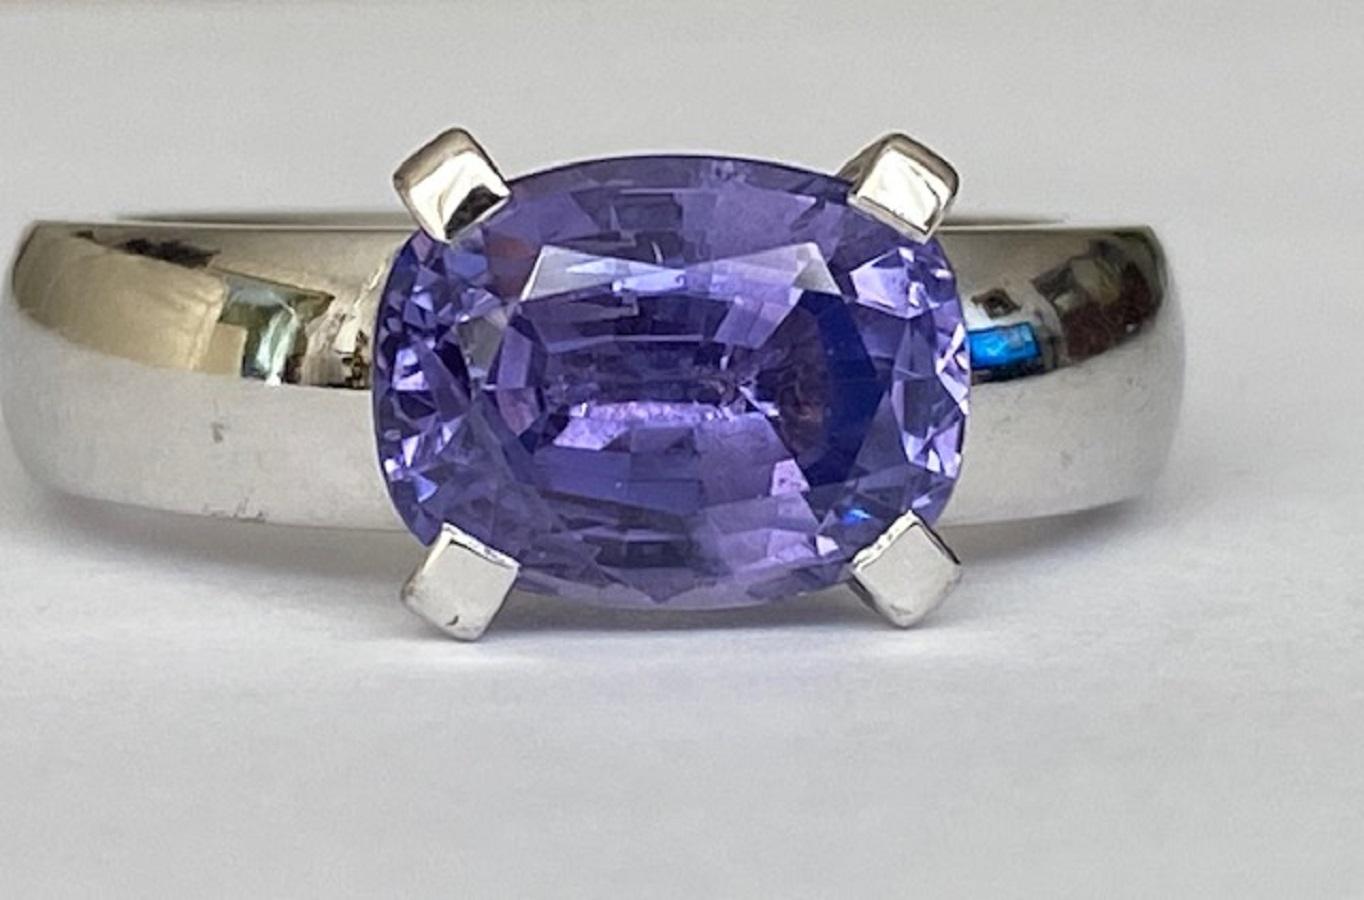 Offered in good condition, a wonderful 18-kt white gold ring with a rectangular cushion cut sapphire of approx. 4.60 ct. This sapphire is “Colour-changing”. Origin: Sri Lanka. No indication of heating. ALGT certificate is included.
THE HOUSE OF